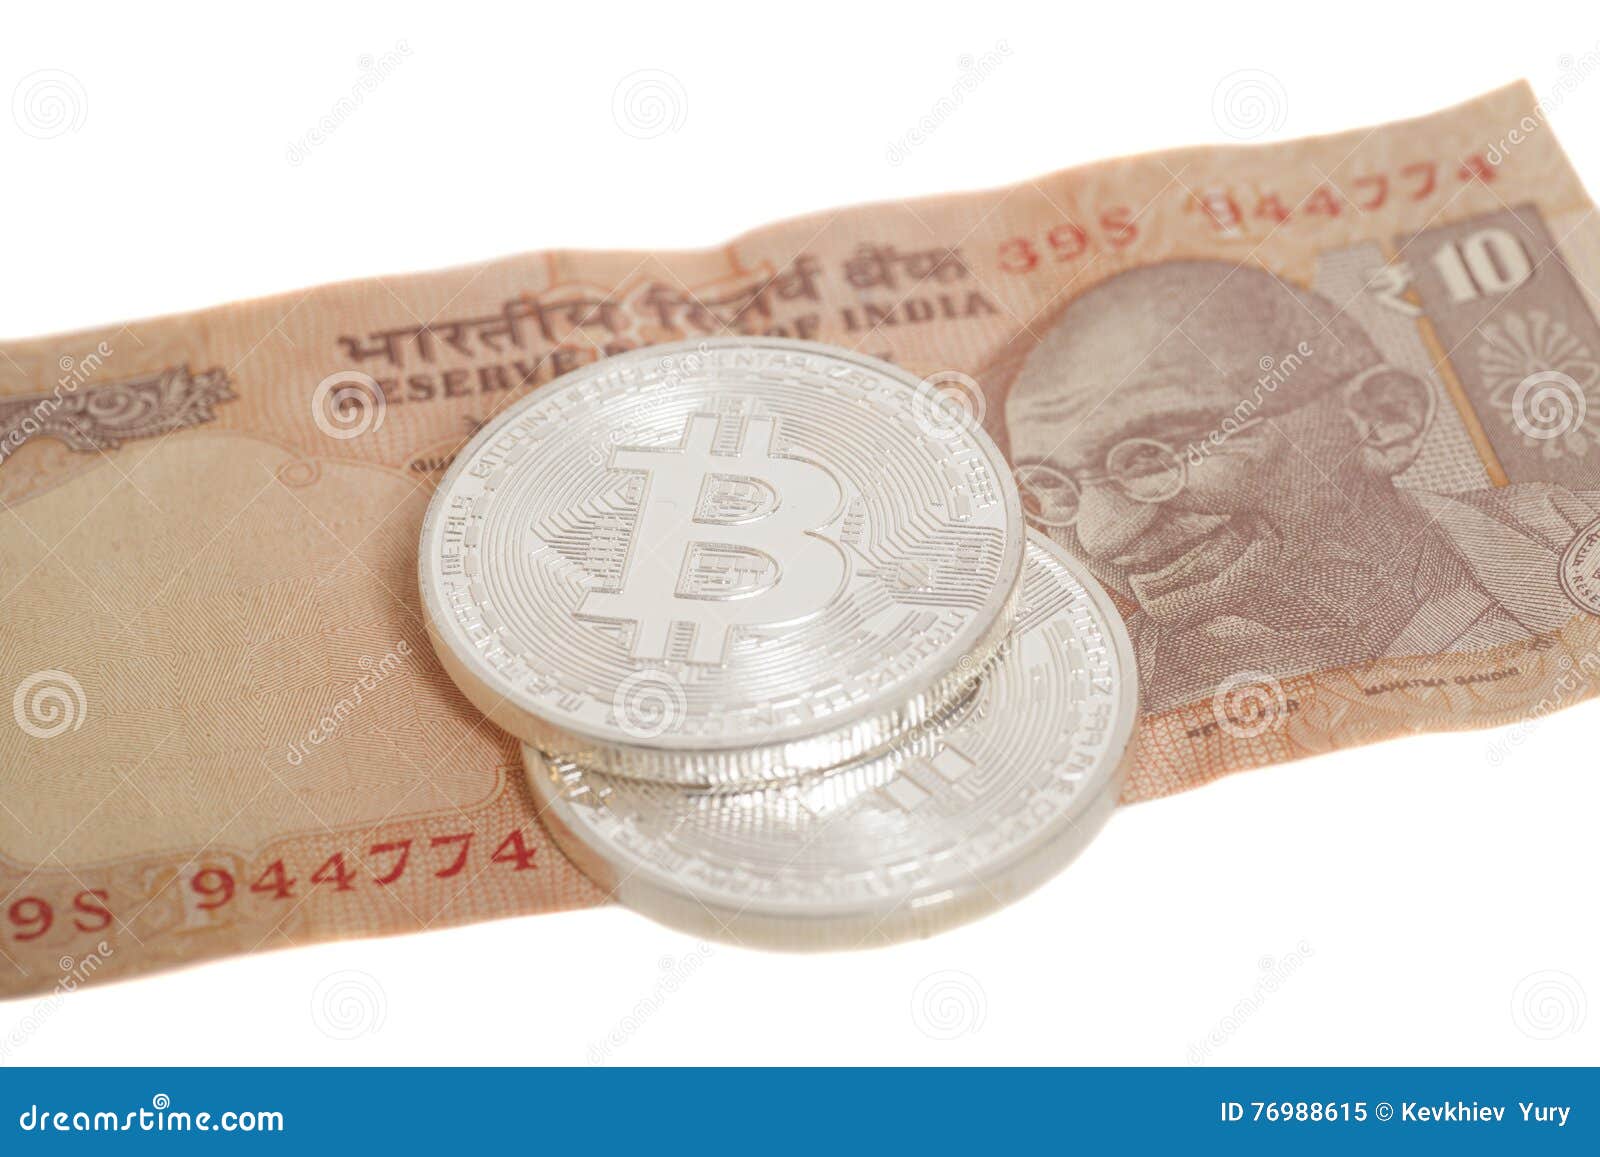 Bitcoin in indian rupees rent a crypto miner